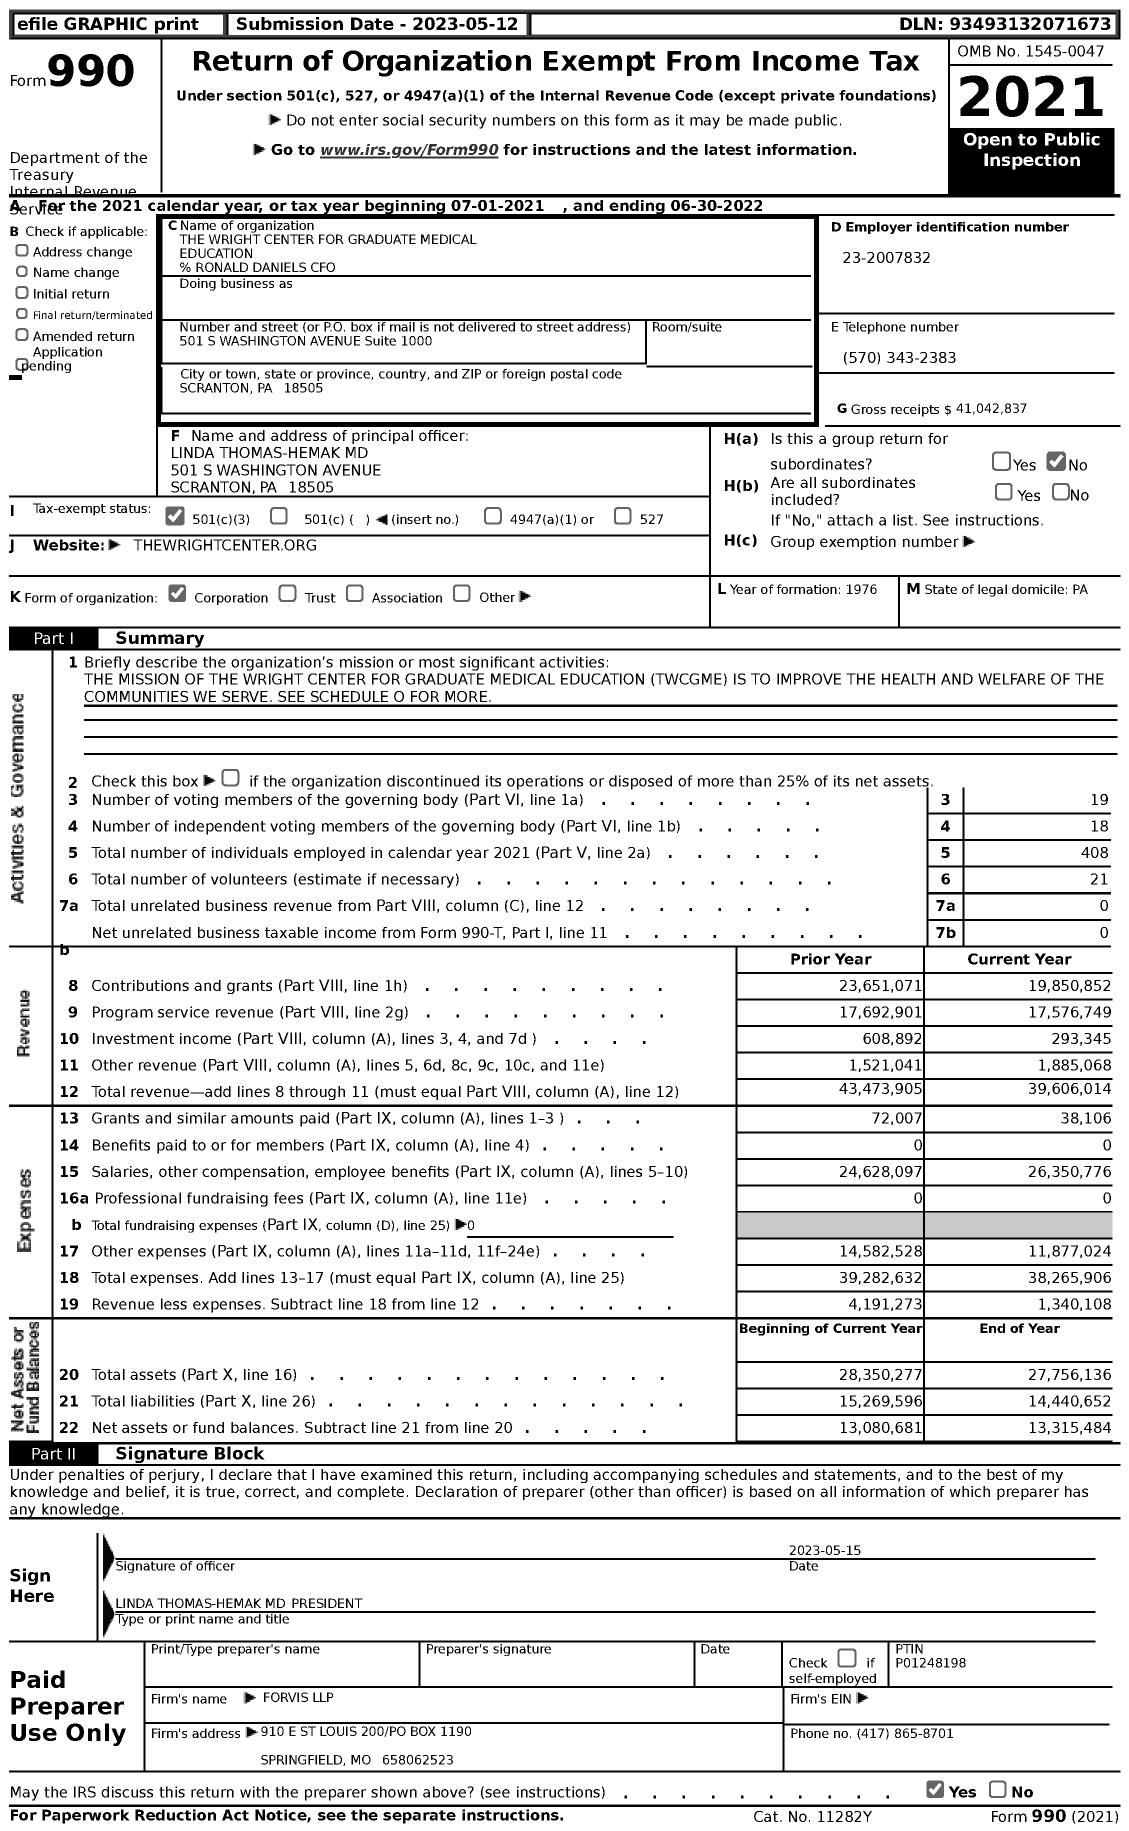 Image of first page of 2021 Form 990 for The Wright Center for Graduate Medical Education